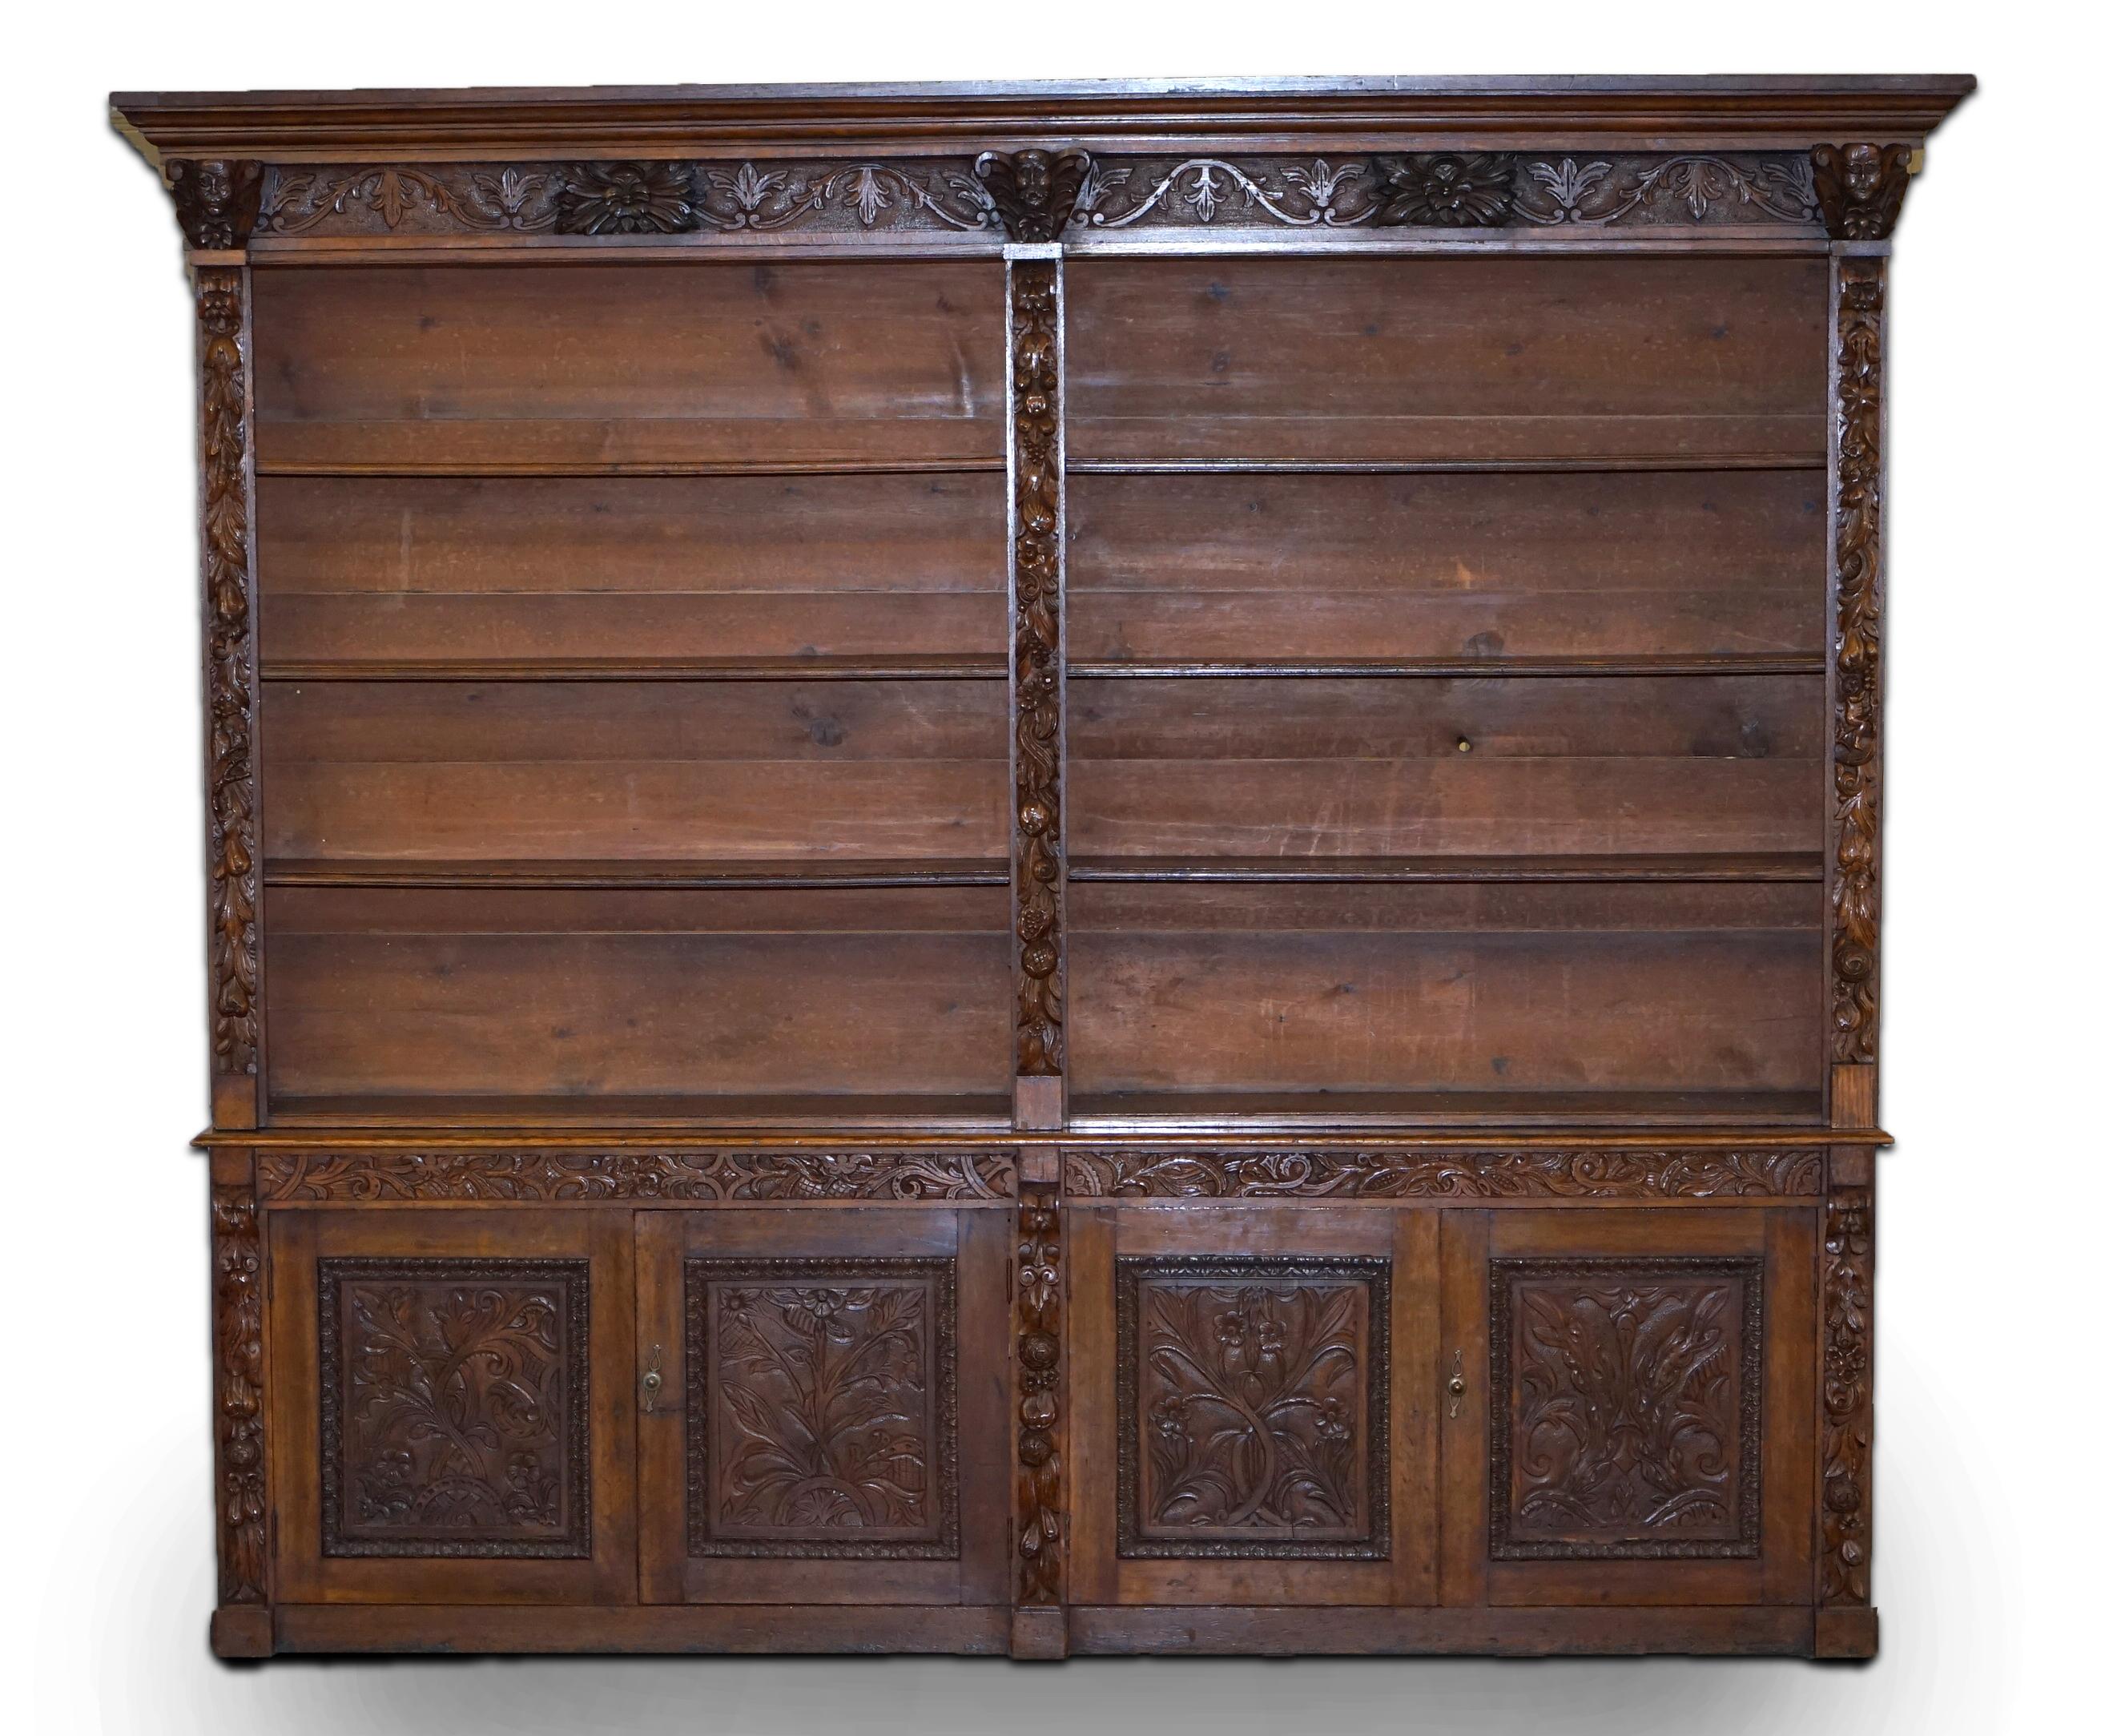 We are delighted to offer for sale this very large hand carved Antique Victorian circa 1840-1860 oak library bookcase with ornate scholar carvings

This is a very grand piece of English country house furniture. It has ornate carving all over with